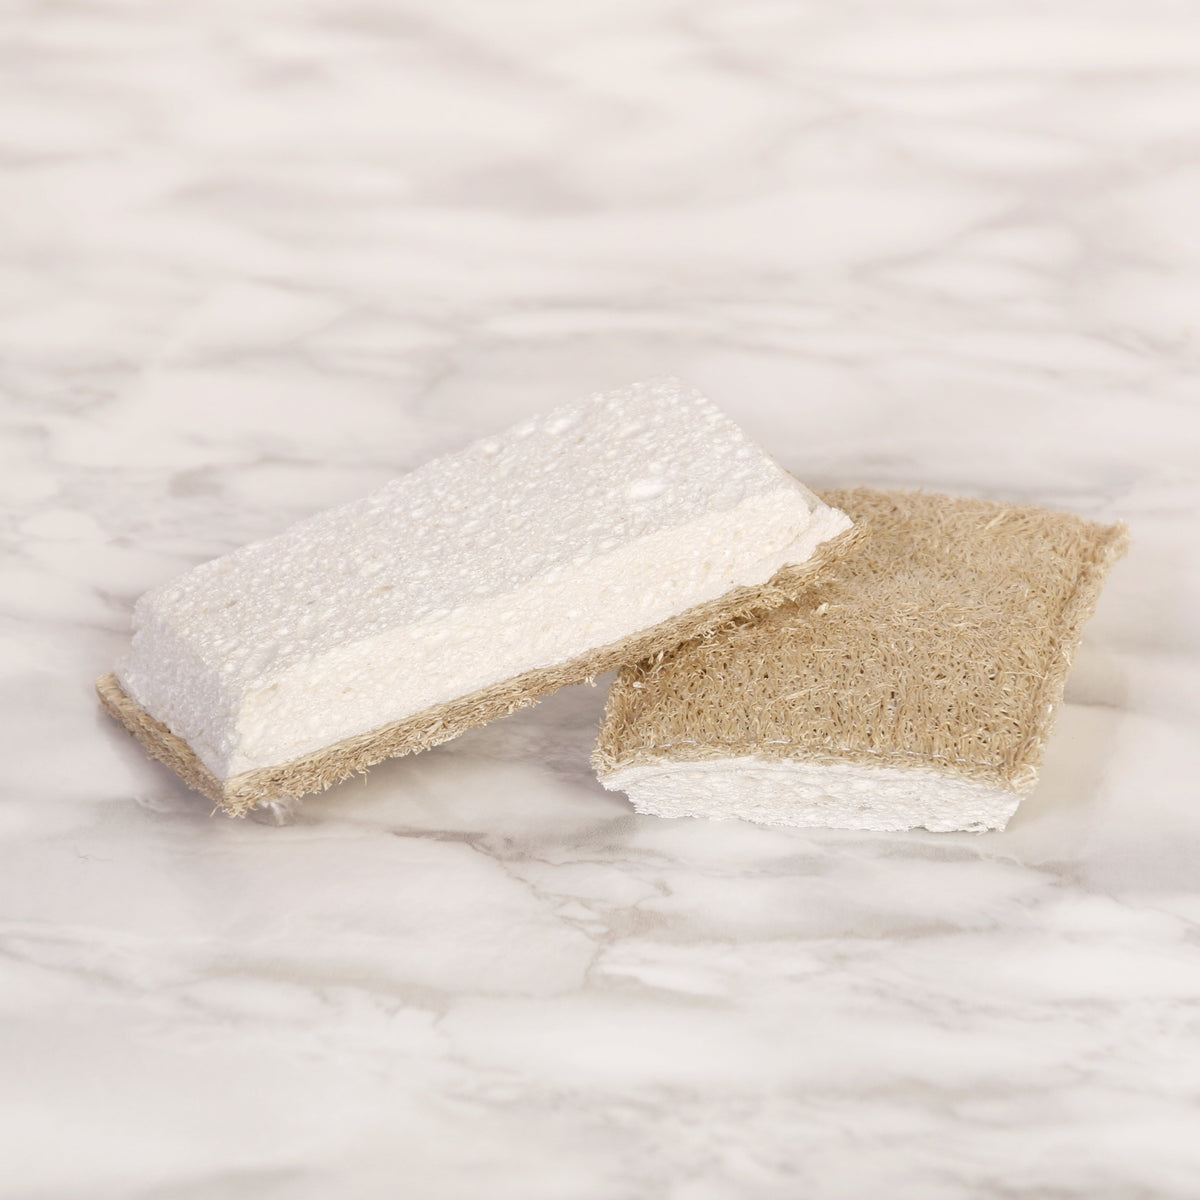 https://ecobeige.com/cdn/shop/products/Eco-Beige-ecofriendly-natural-wood-celluose-loofah-sponge-beige-white-two-sided-luffa-sponge-kitchen-cleaning-tool-sustainable-compostable-plastic-free-alternative-vancouver-Eco-Beige_521226b1-891c-452f-b0bc-5db4bbb23f62_1200x1200.jpg?v=1627272988